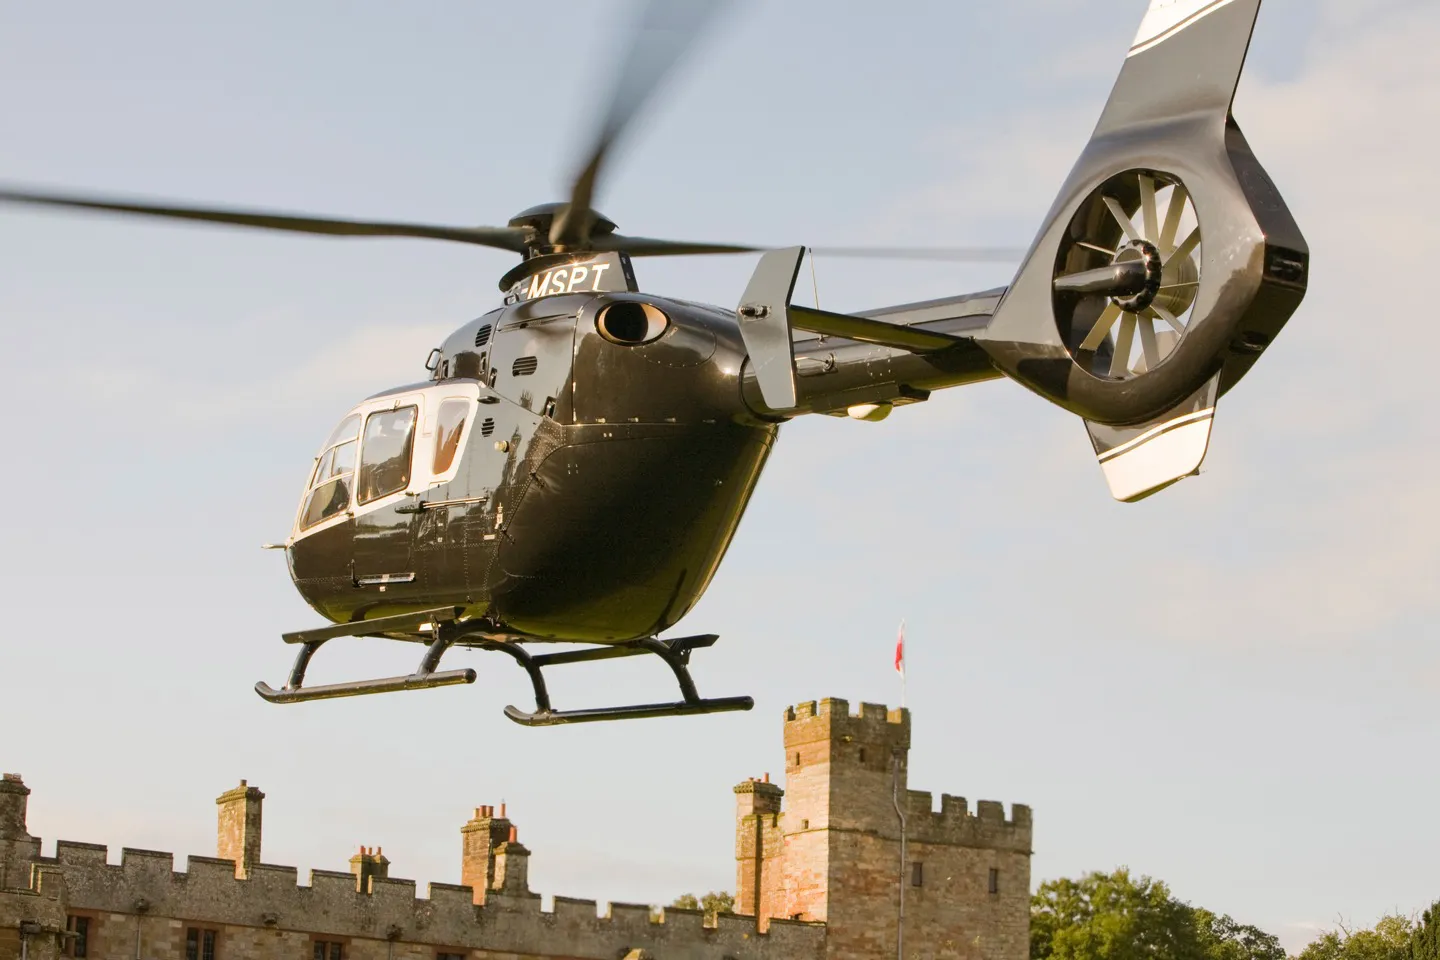 Enjoy chartered helicopter flights from Sussex to Goodwood as part of your luxury Festival of Speed hospitality